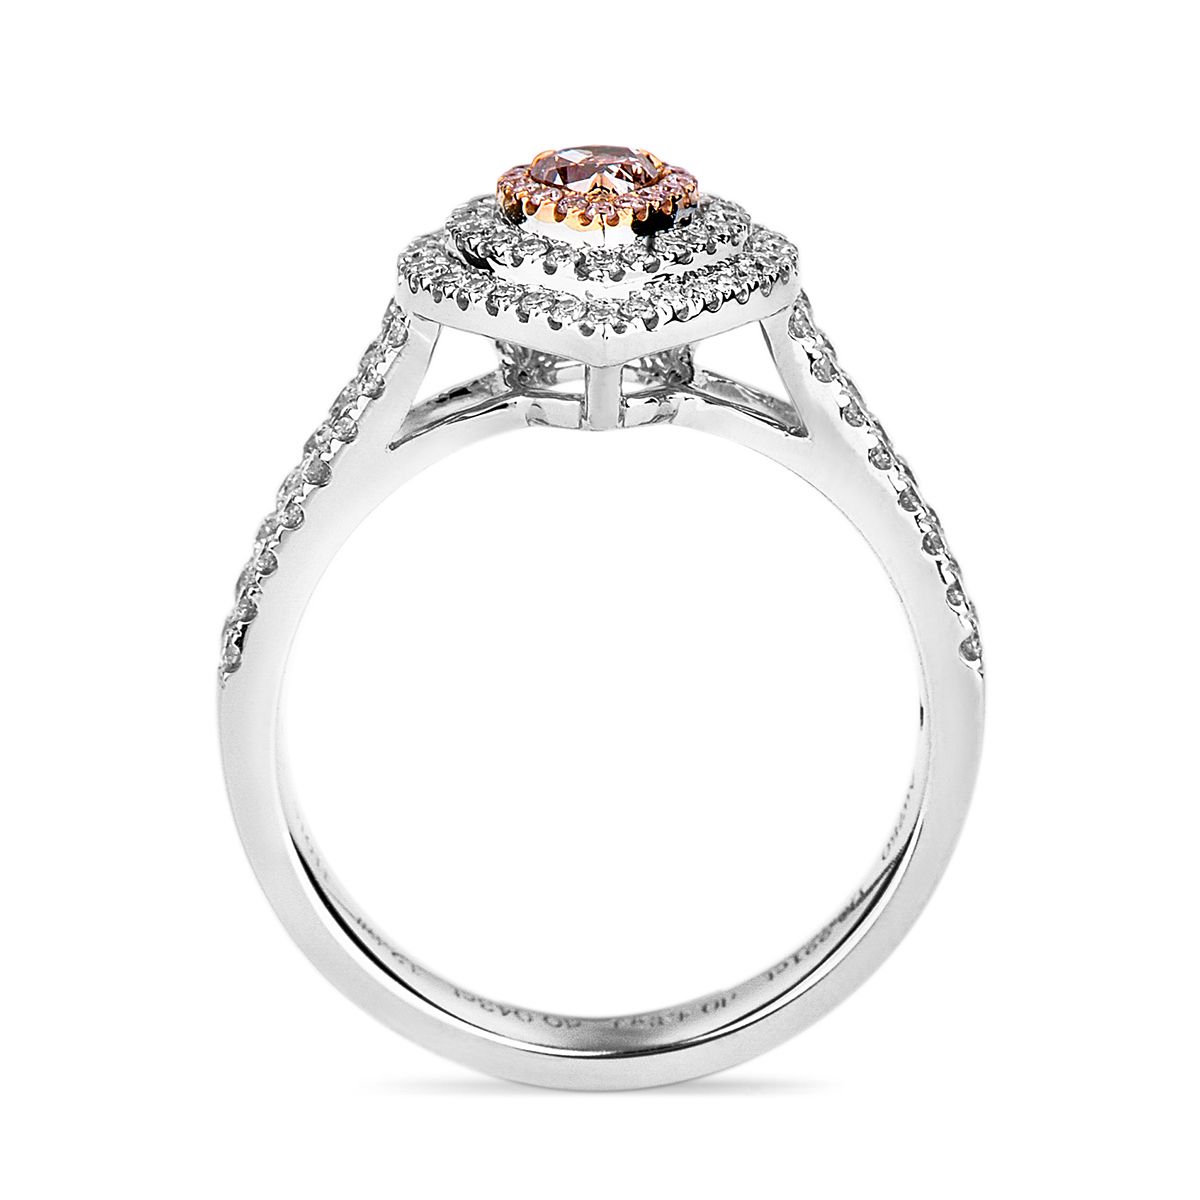 Fancy Pink Diamond Ring, 0.25 Ct. (0.73 Ct. TW), Pear shape, GIA Certified, 1208460075